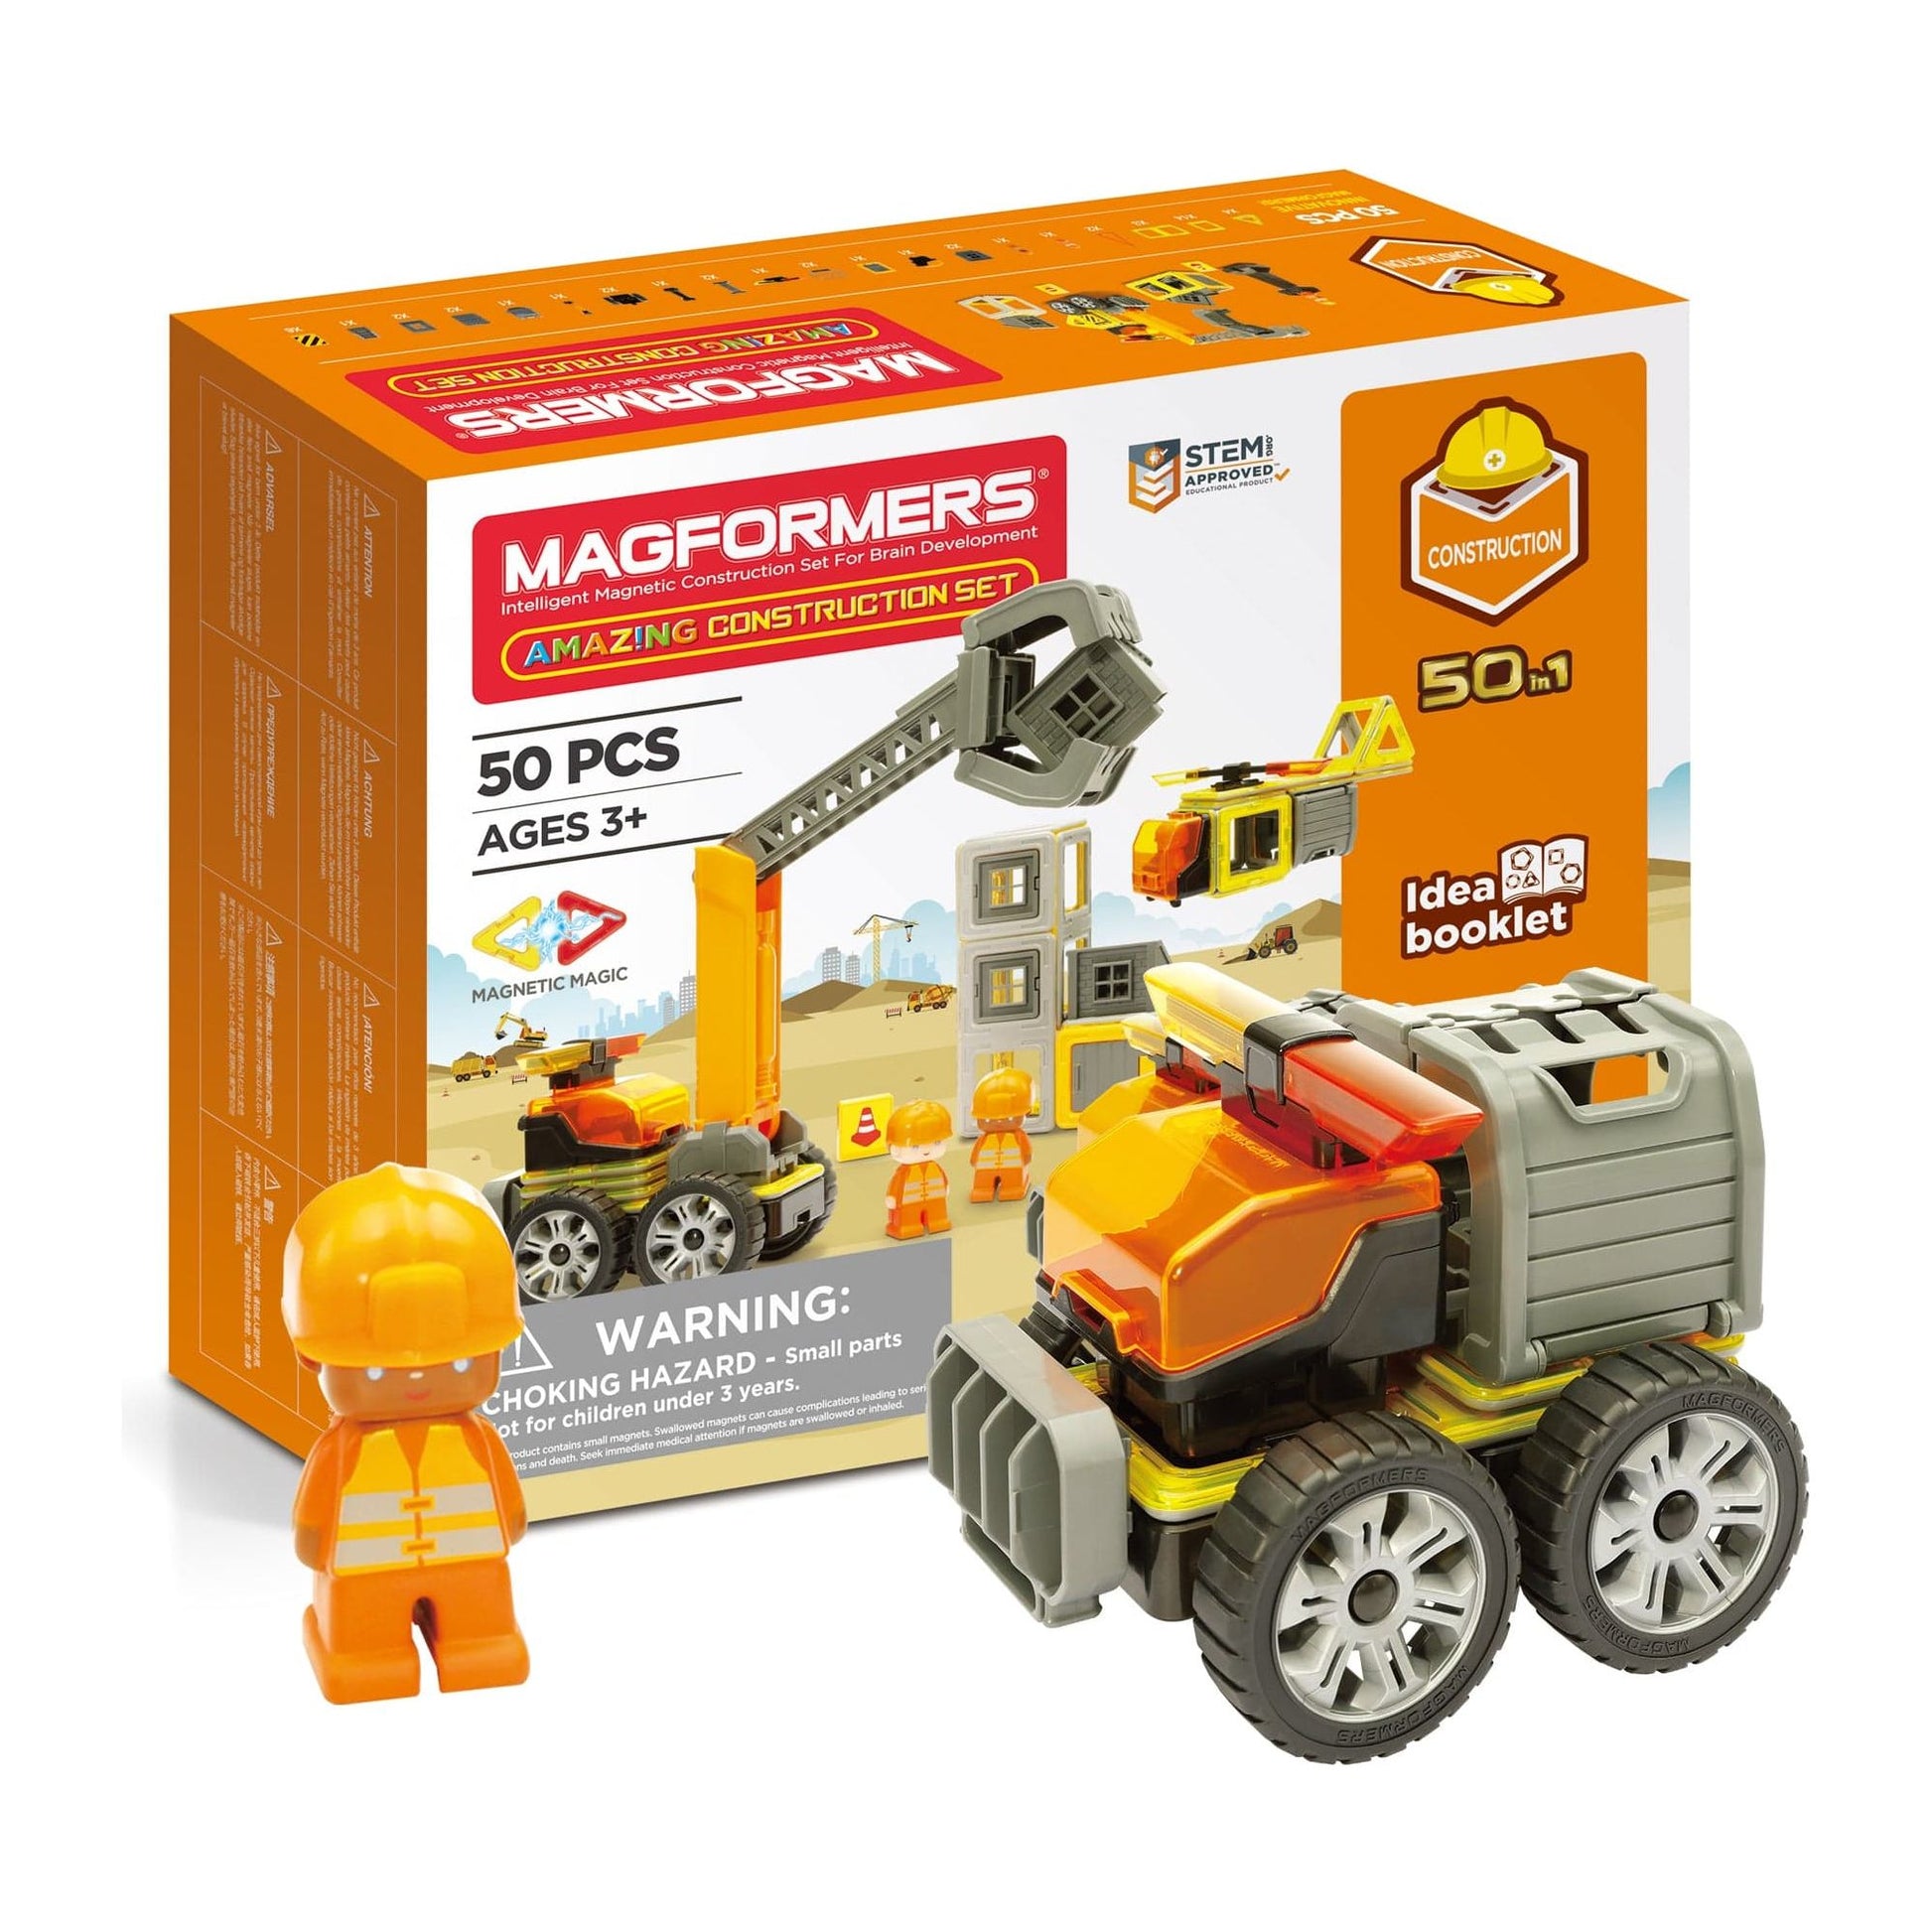 Magformers Amazing Construction 50 Piece Set box and truck